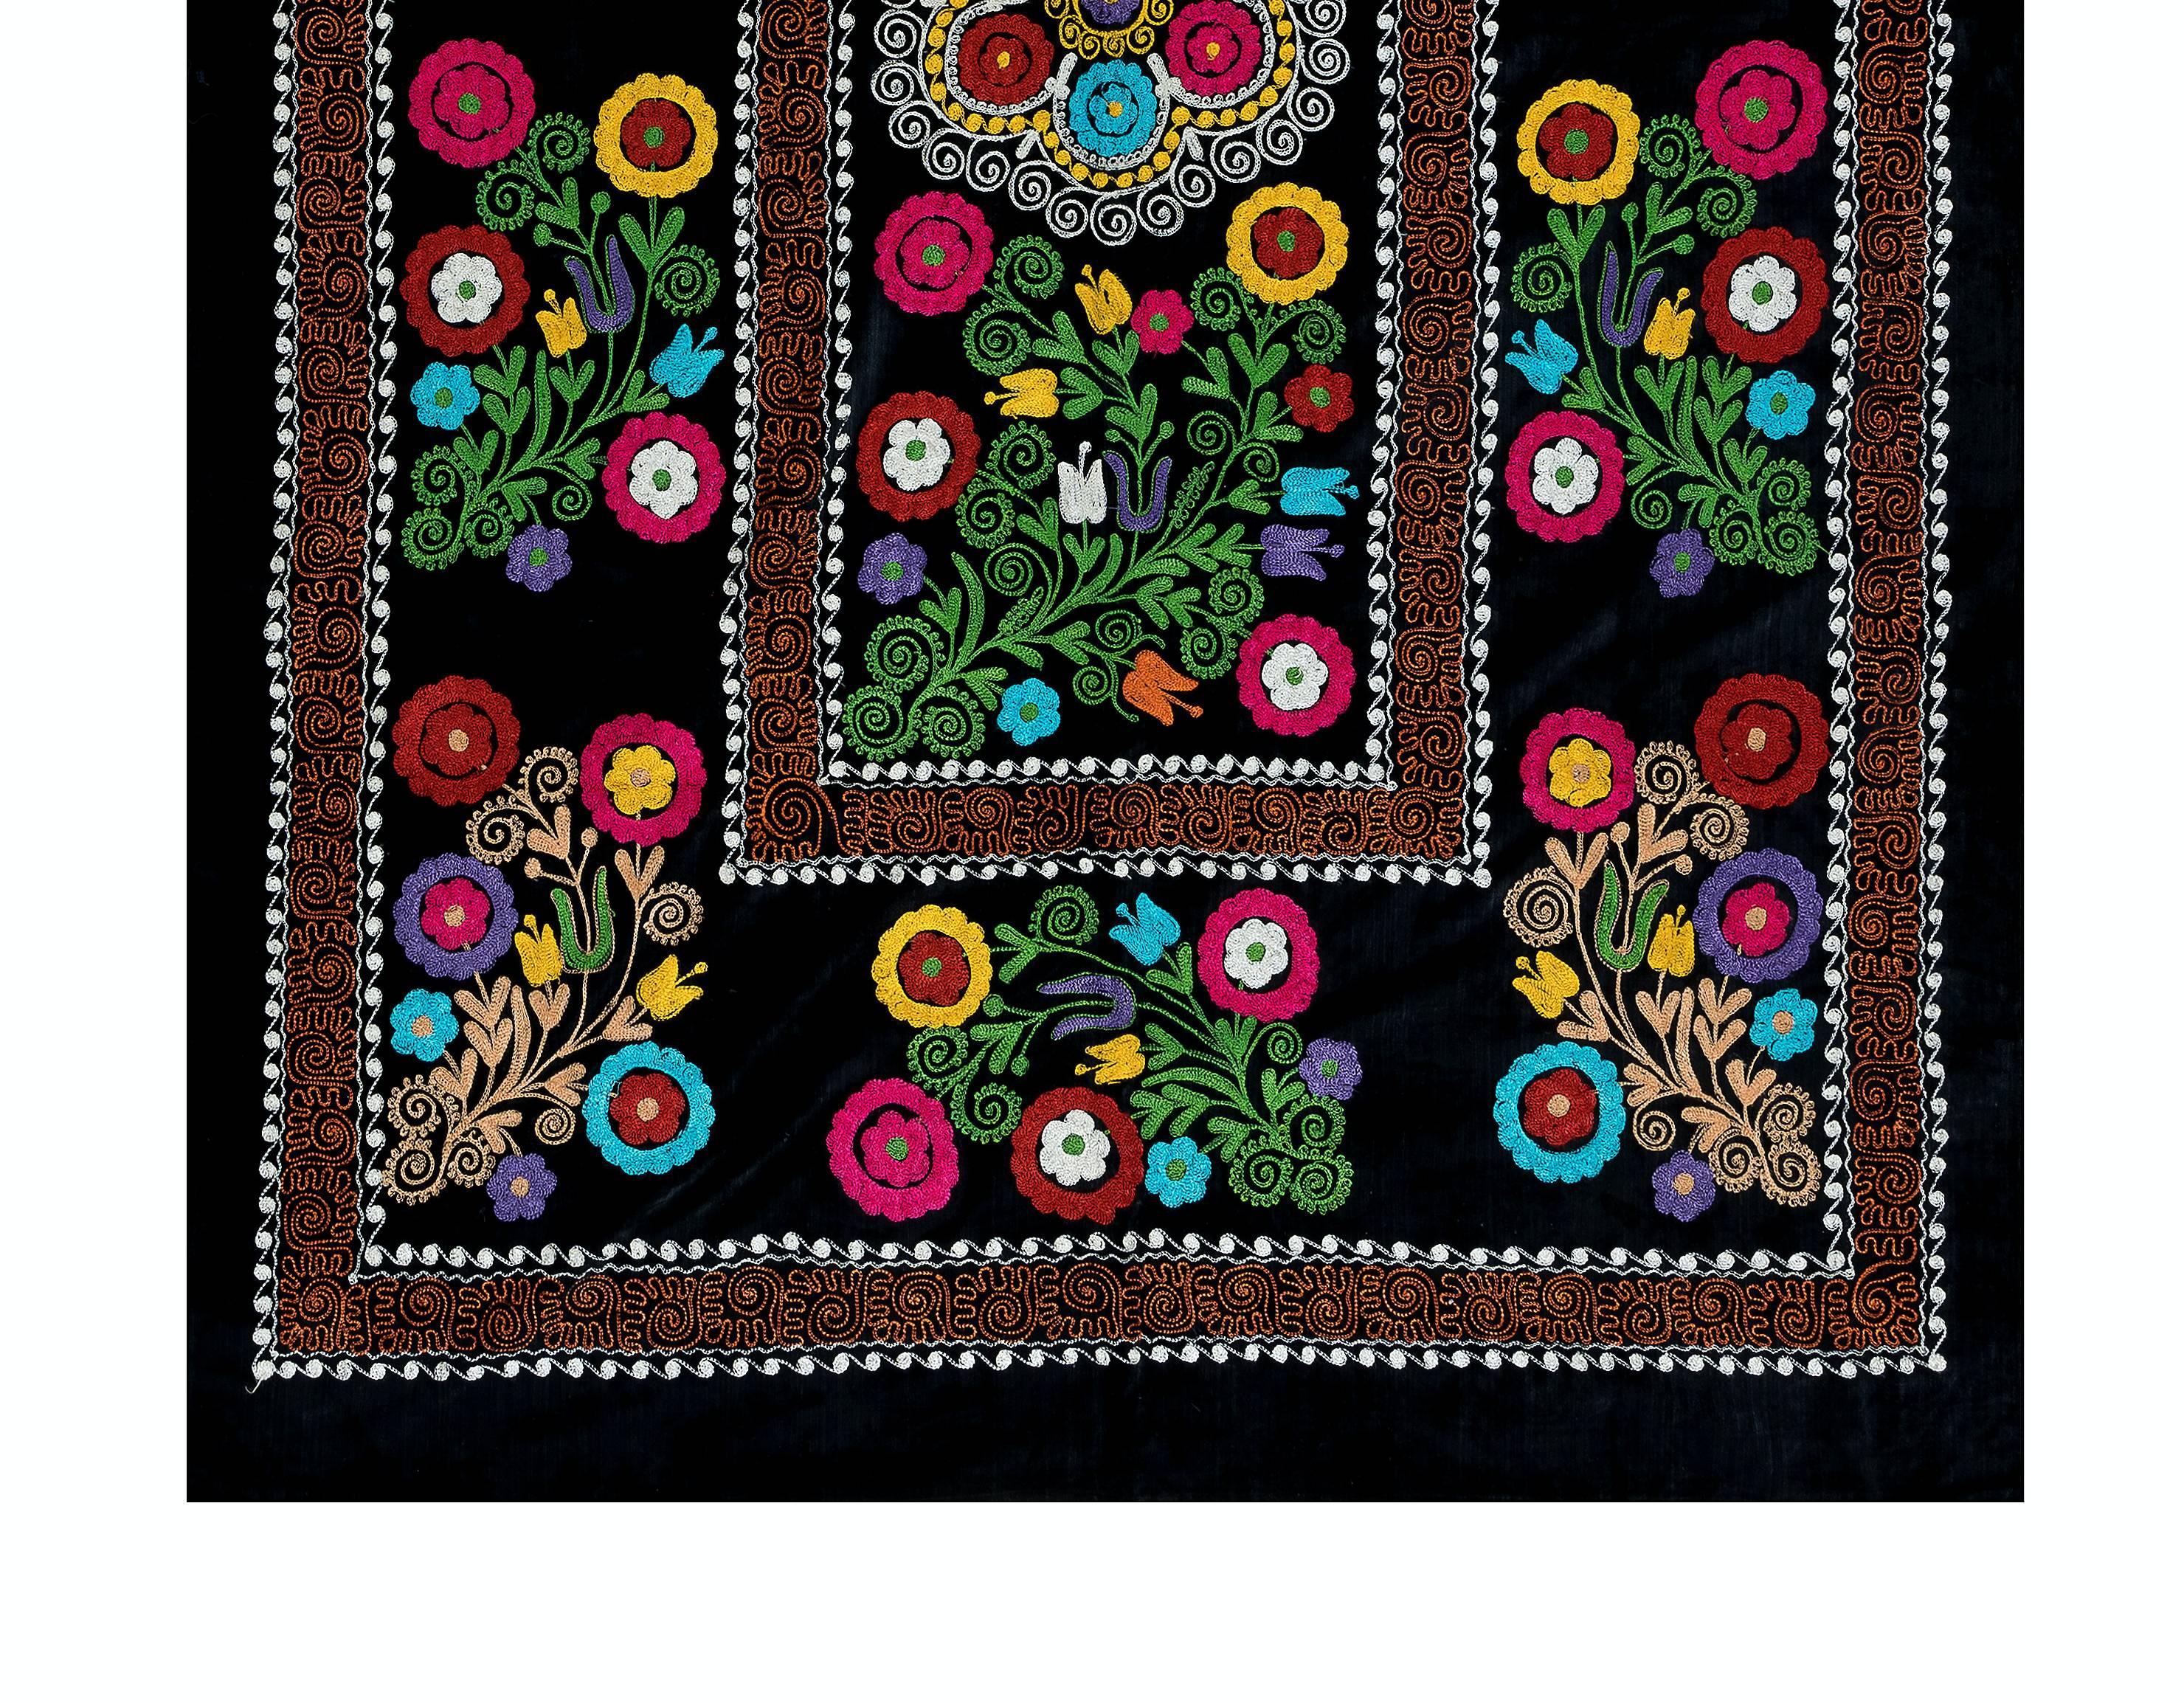 Uzbek 4.3x6.8 Ft Silk Hand Embroidery Bed Cover, Asian Suzani Wall Hanging in Black For Sale